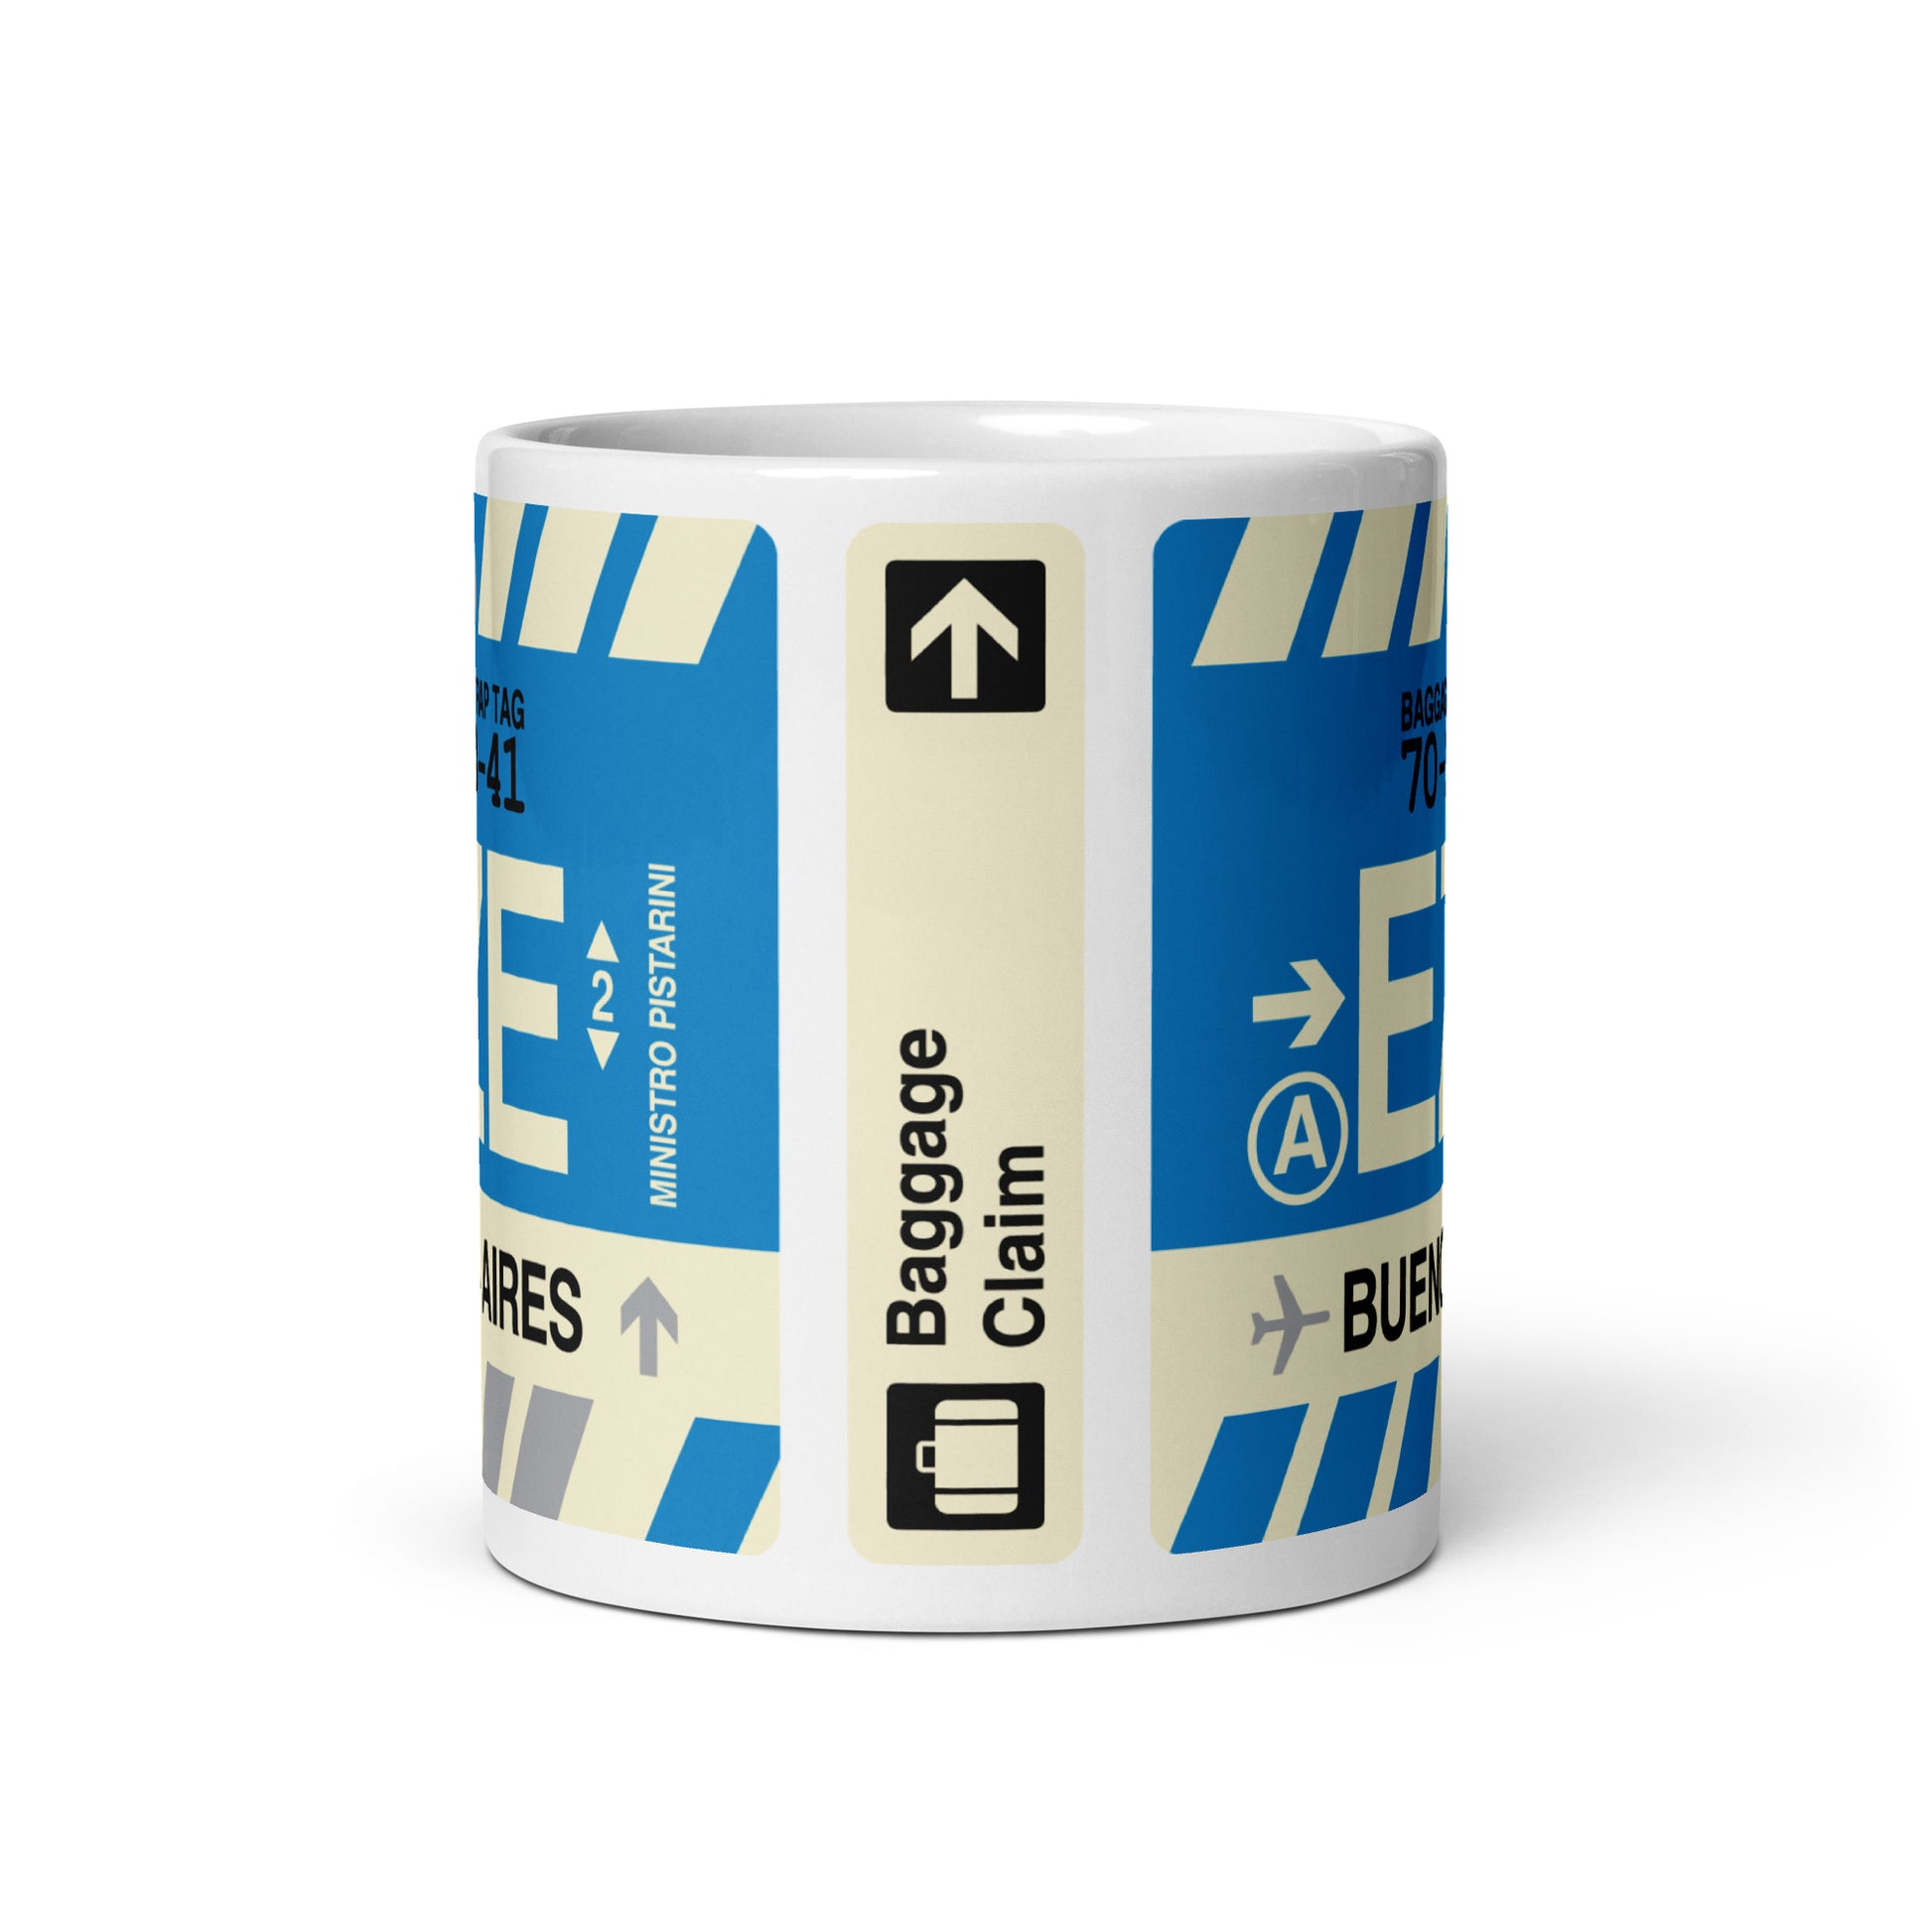 Travel-Themed Coffee Mug • EZE Buenos Aires • YHM Designs - Image 02